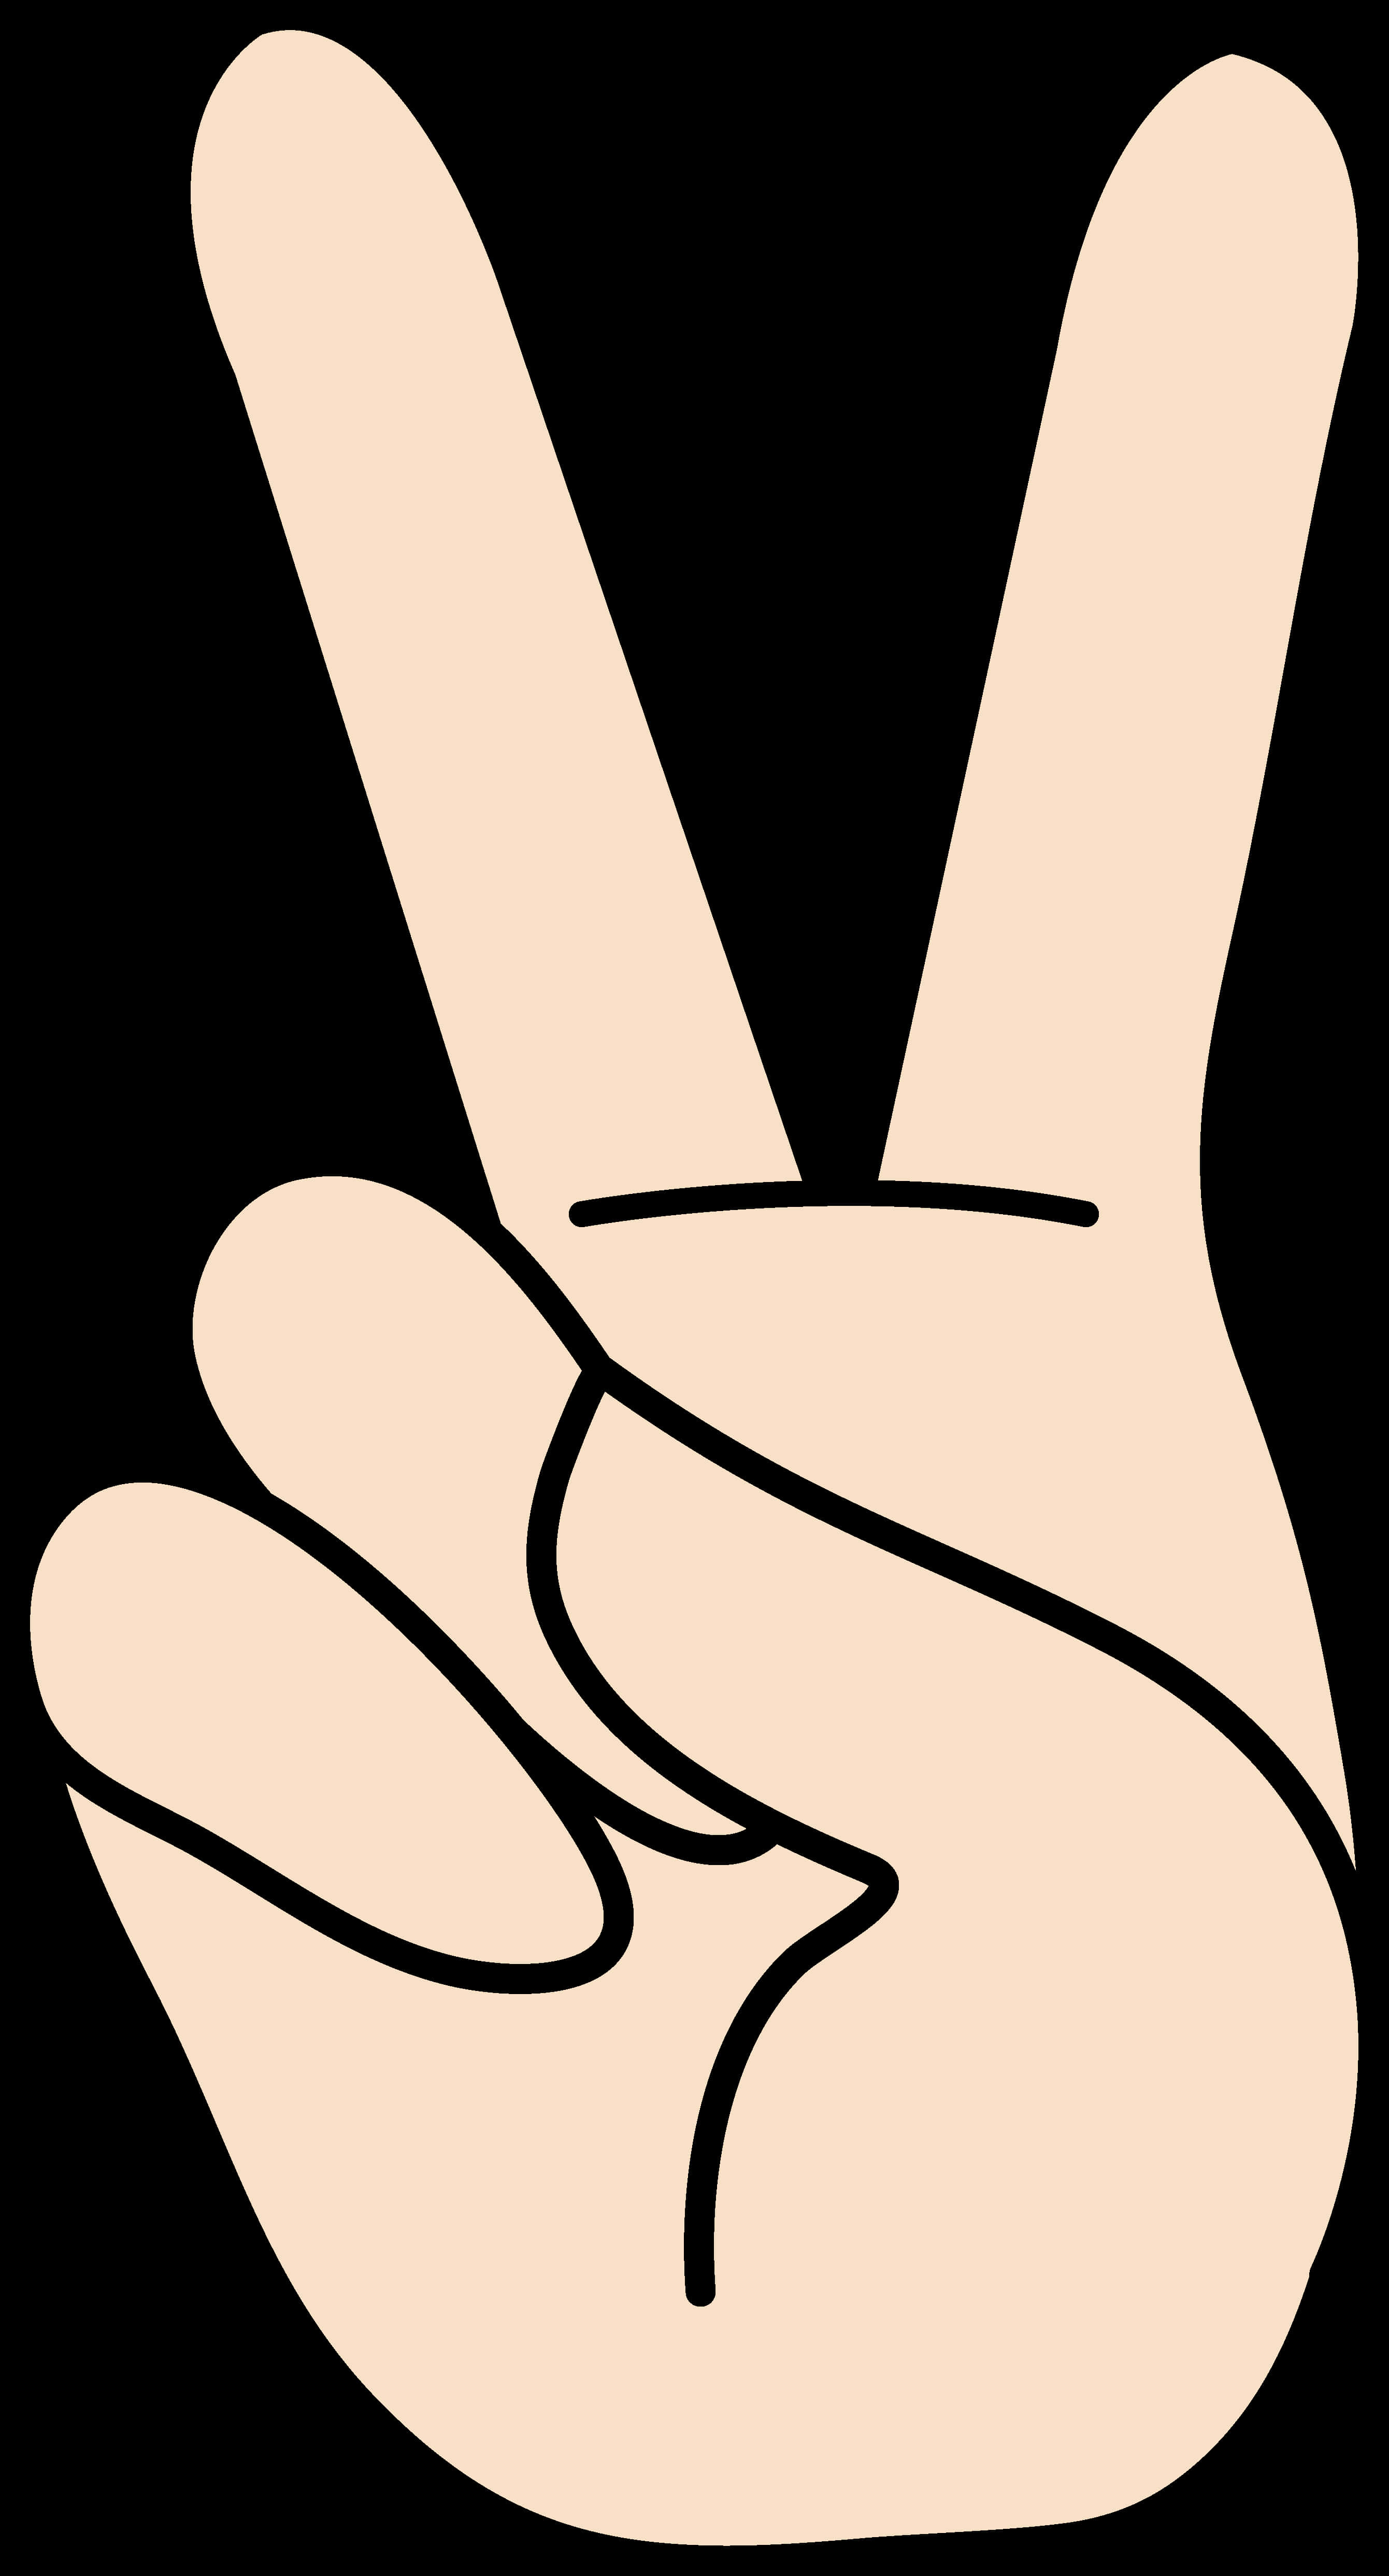 Peace Sign Hand Gesture Illustration PNG